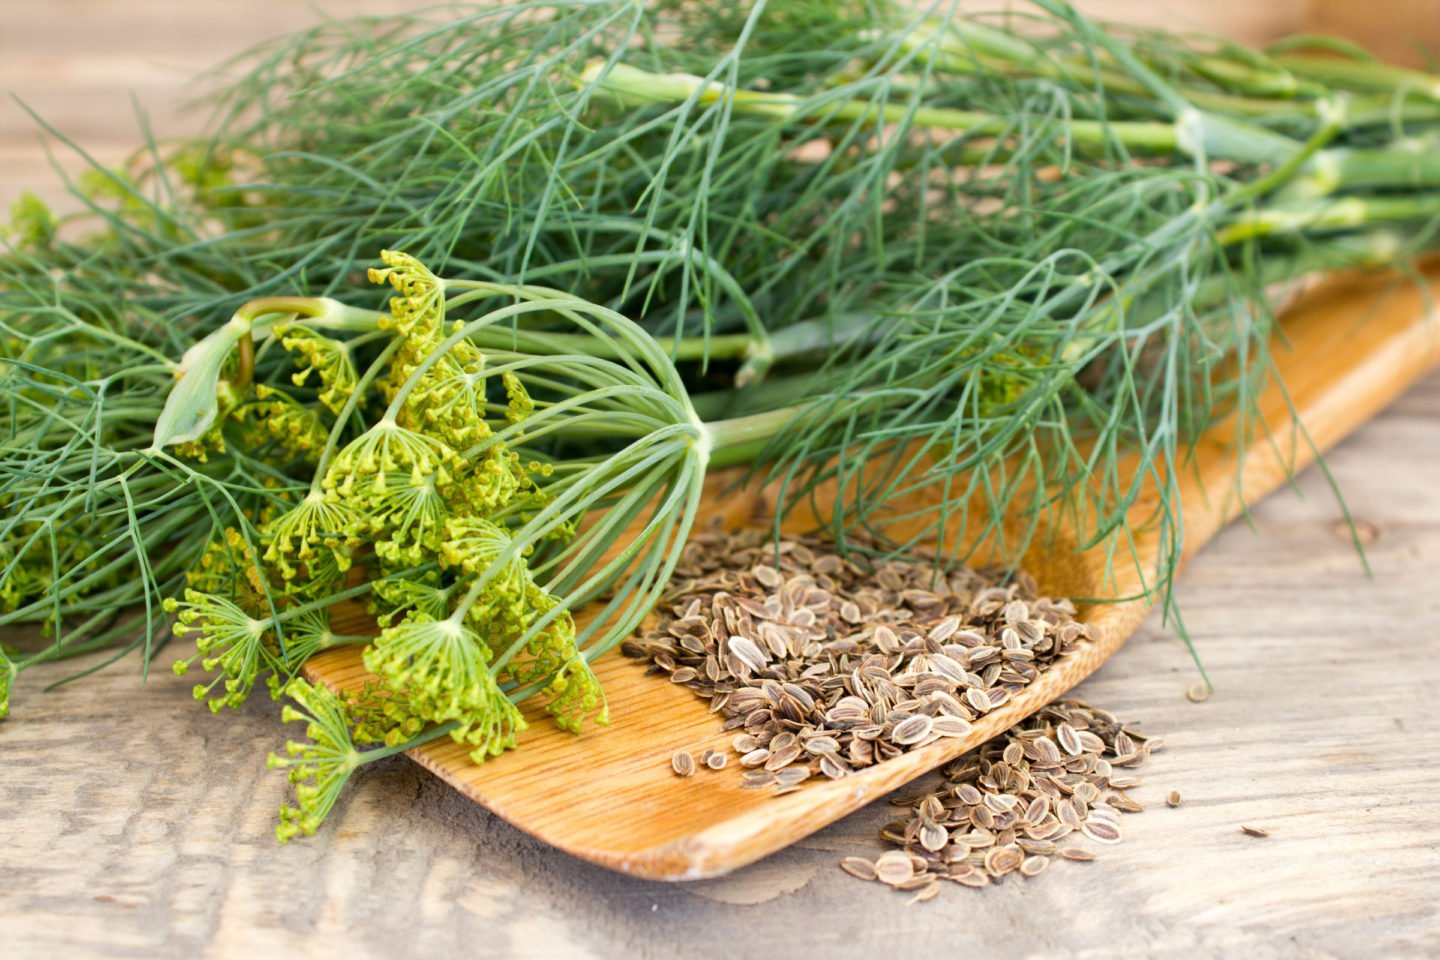 fresh dill fronds with flowers and seeds